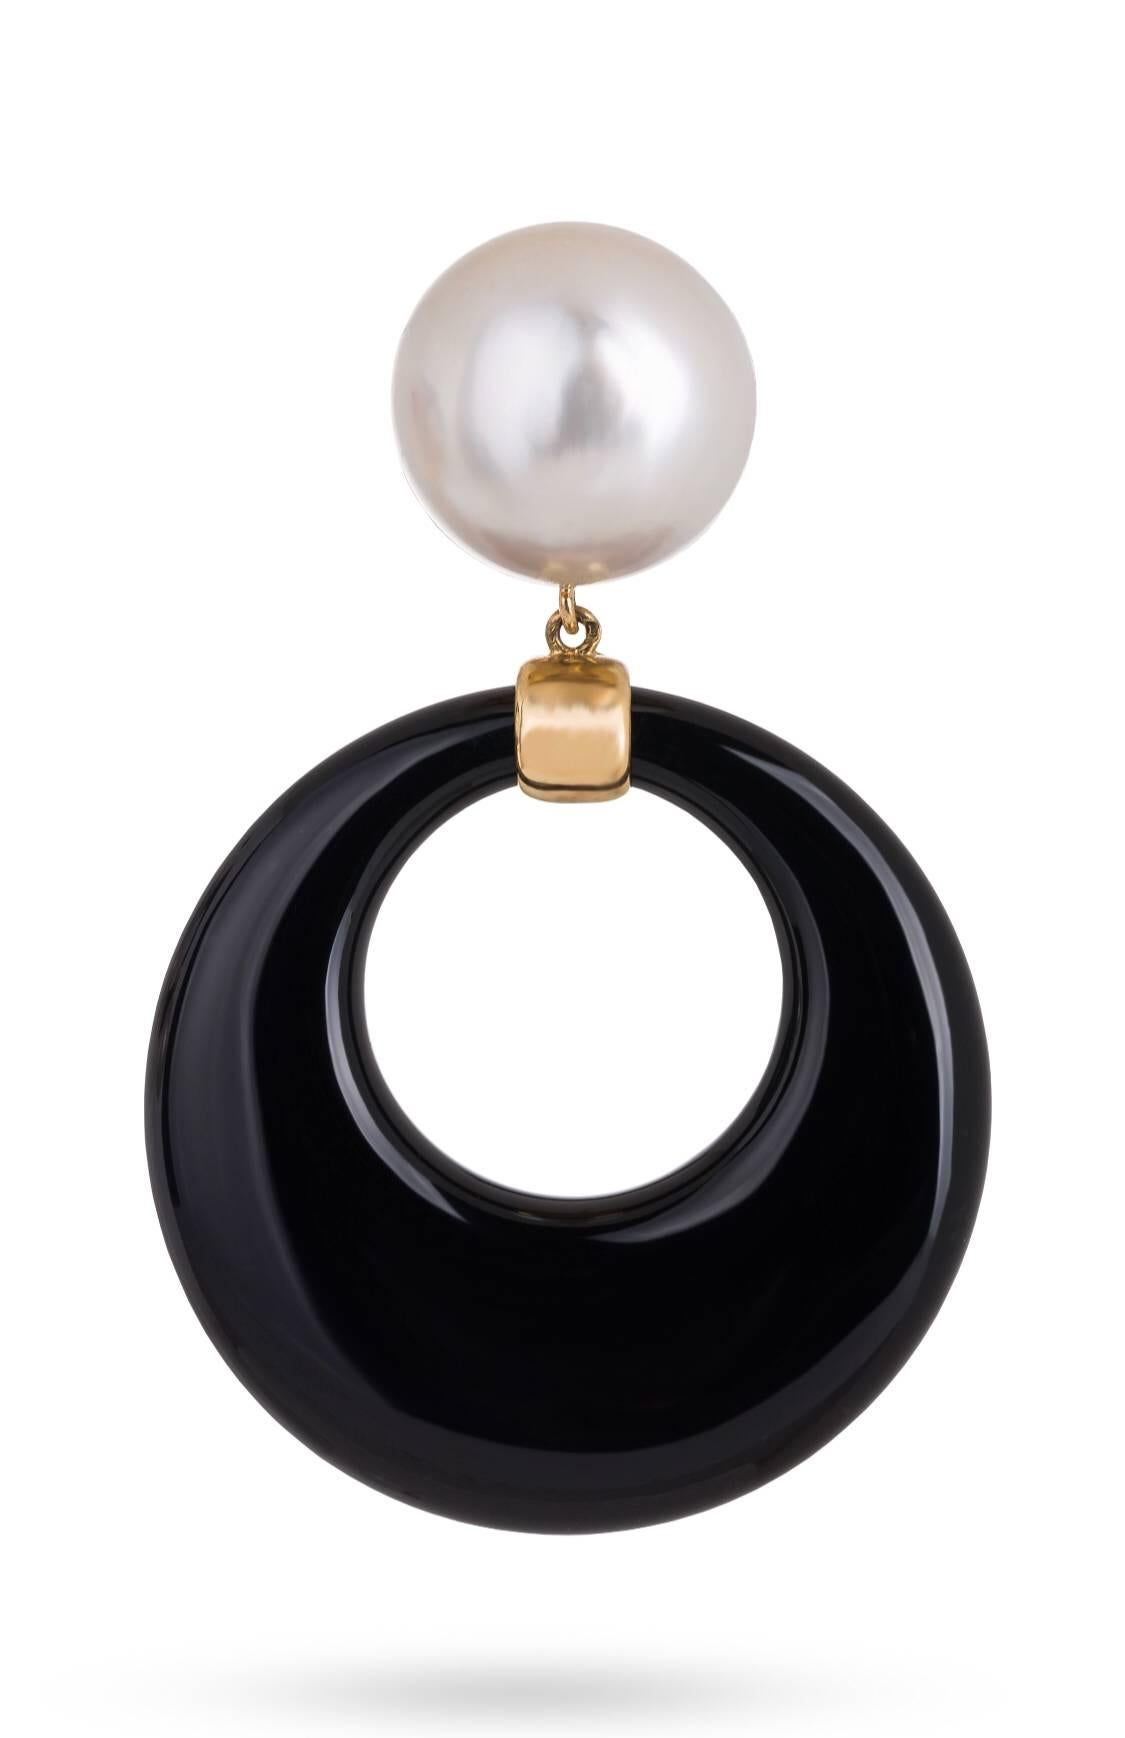 Long, but not too heavy, except in their impact 18K Yellow Gold Earrings. Each Earring has an open free floating Onyx drop rings. The top of each Earring has a Mabe Pearl Set in Gold.
The Earrings are post back with lots of movement on the Ear.